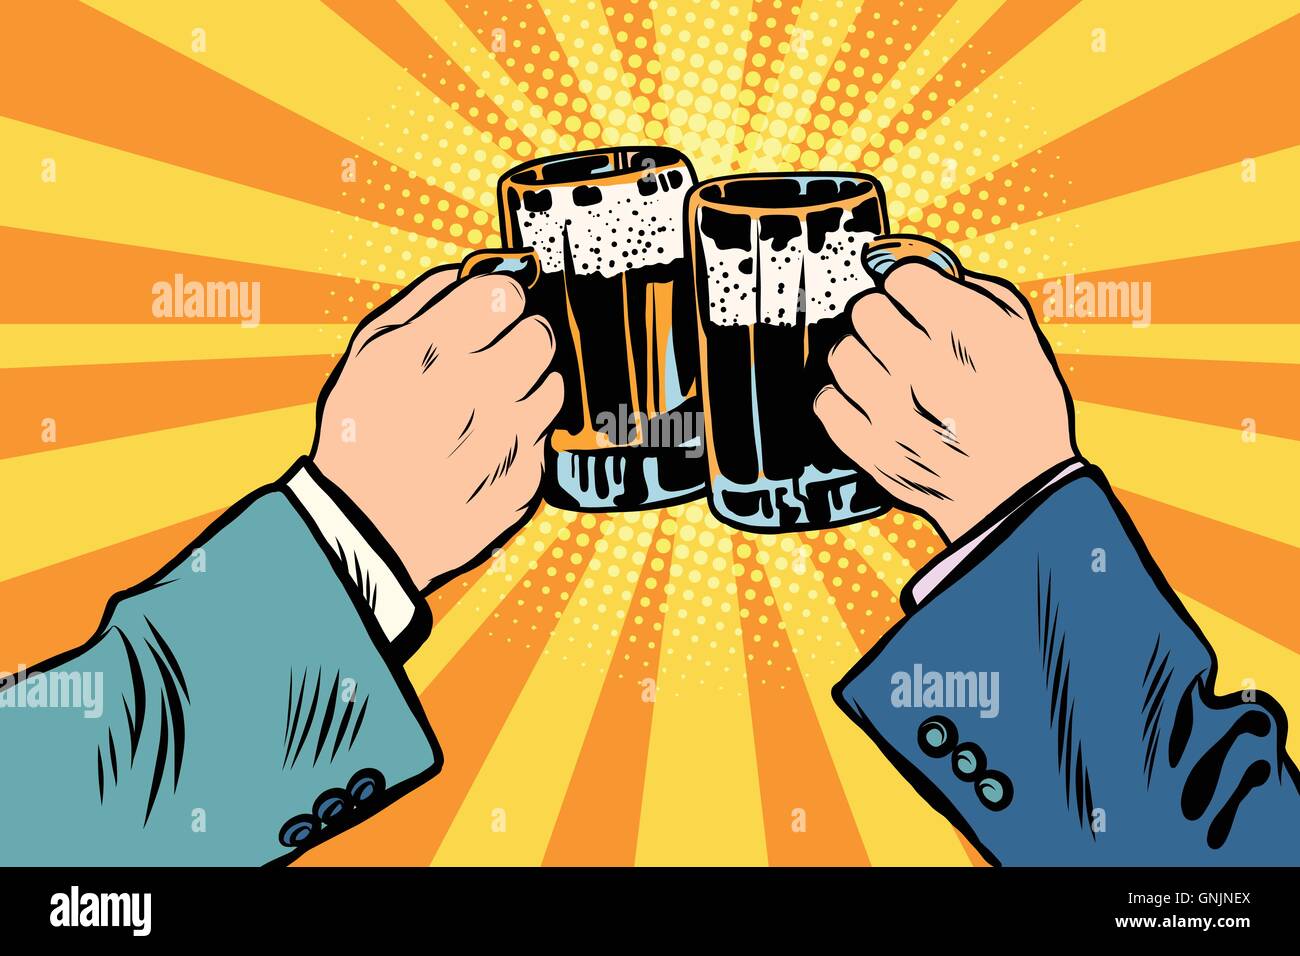 toasting hands beer party poster Stock Vector